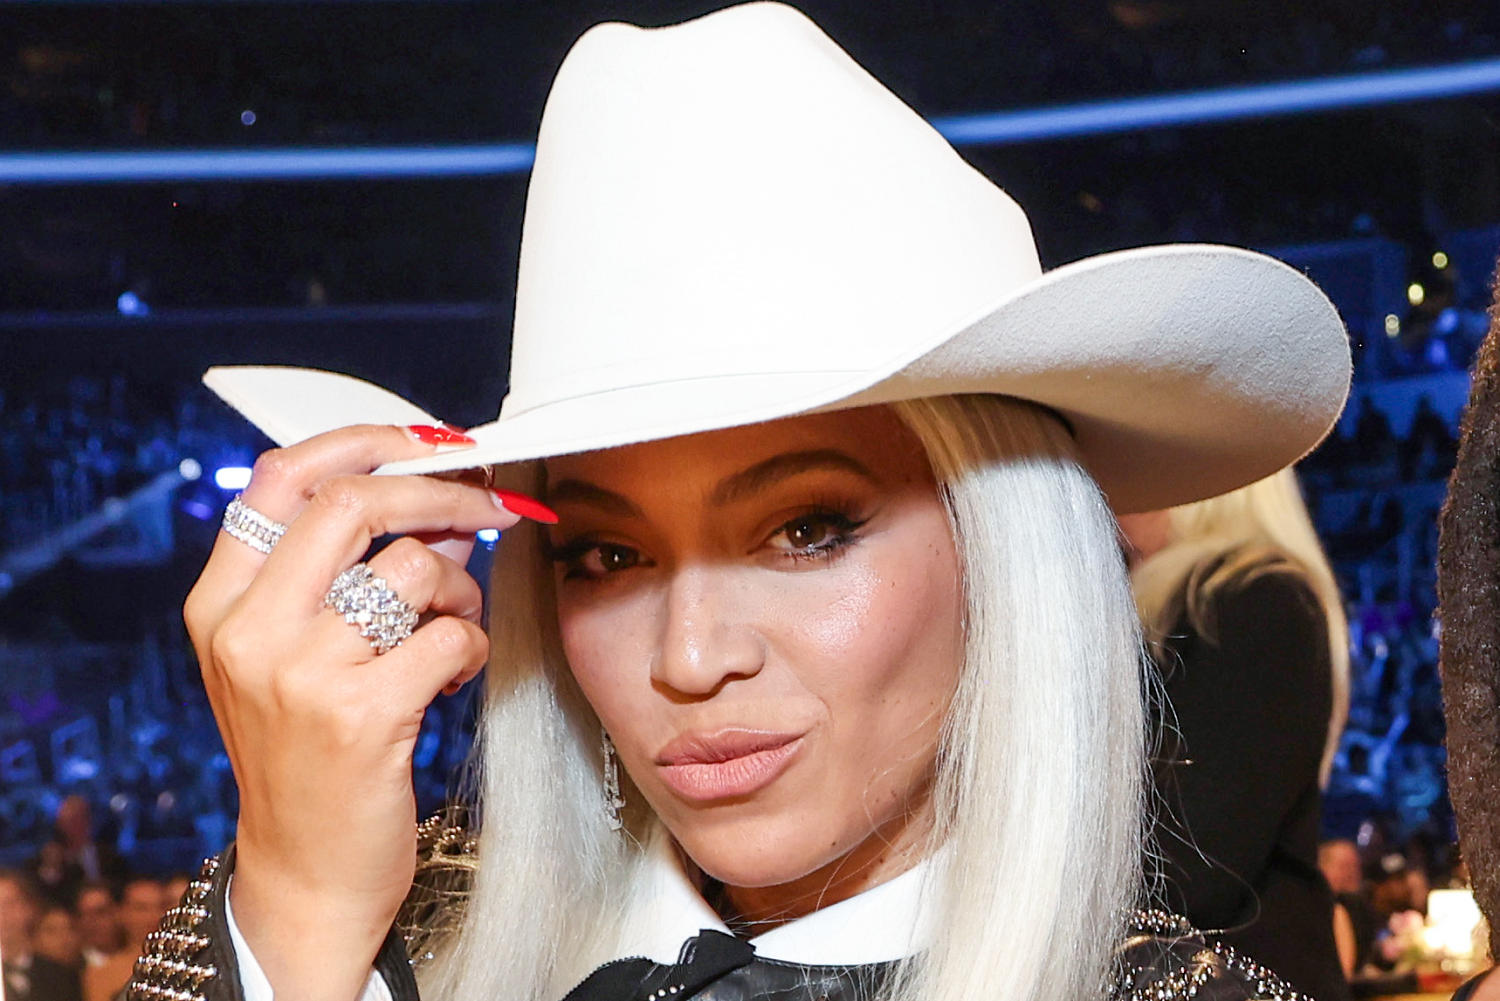 beyoncé tops billboard country chart with genre debut “texas hold ‘em”